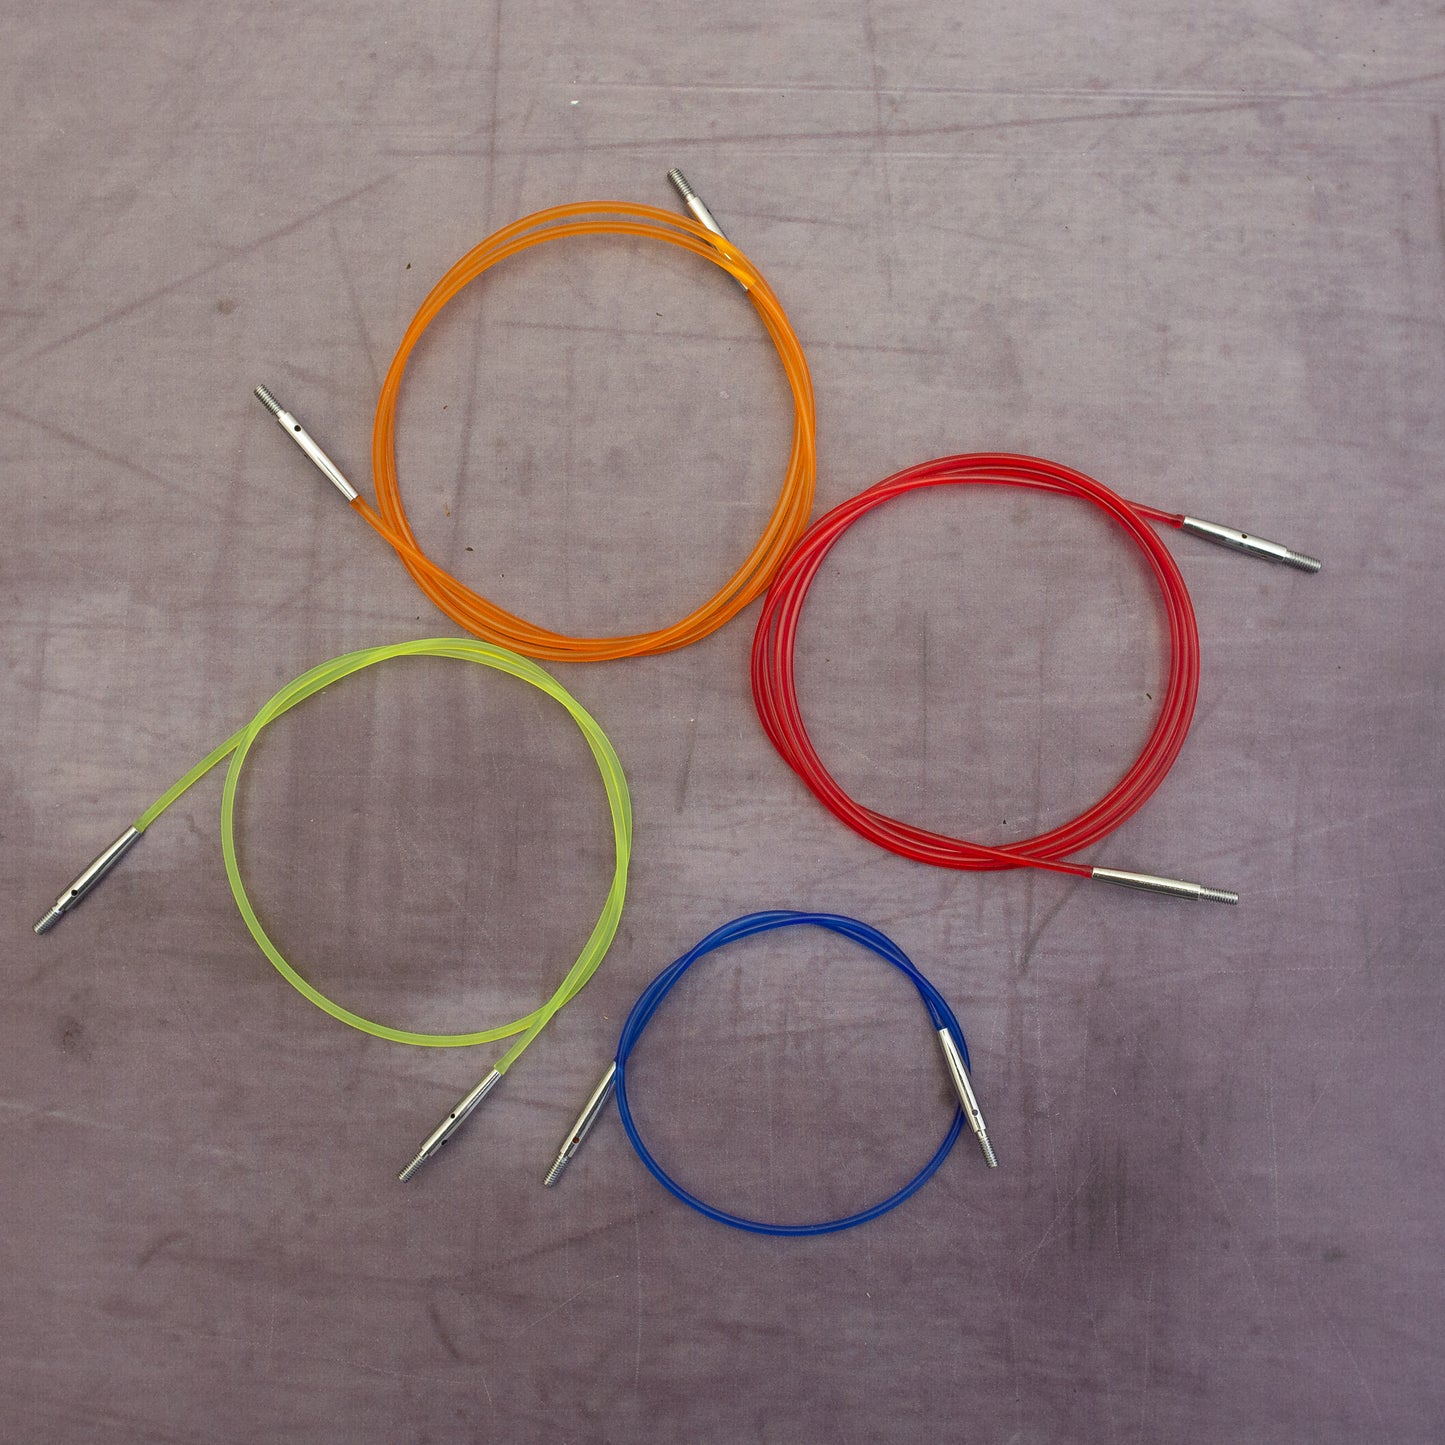 Knit Pro - Interchangeable needle cable